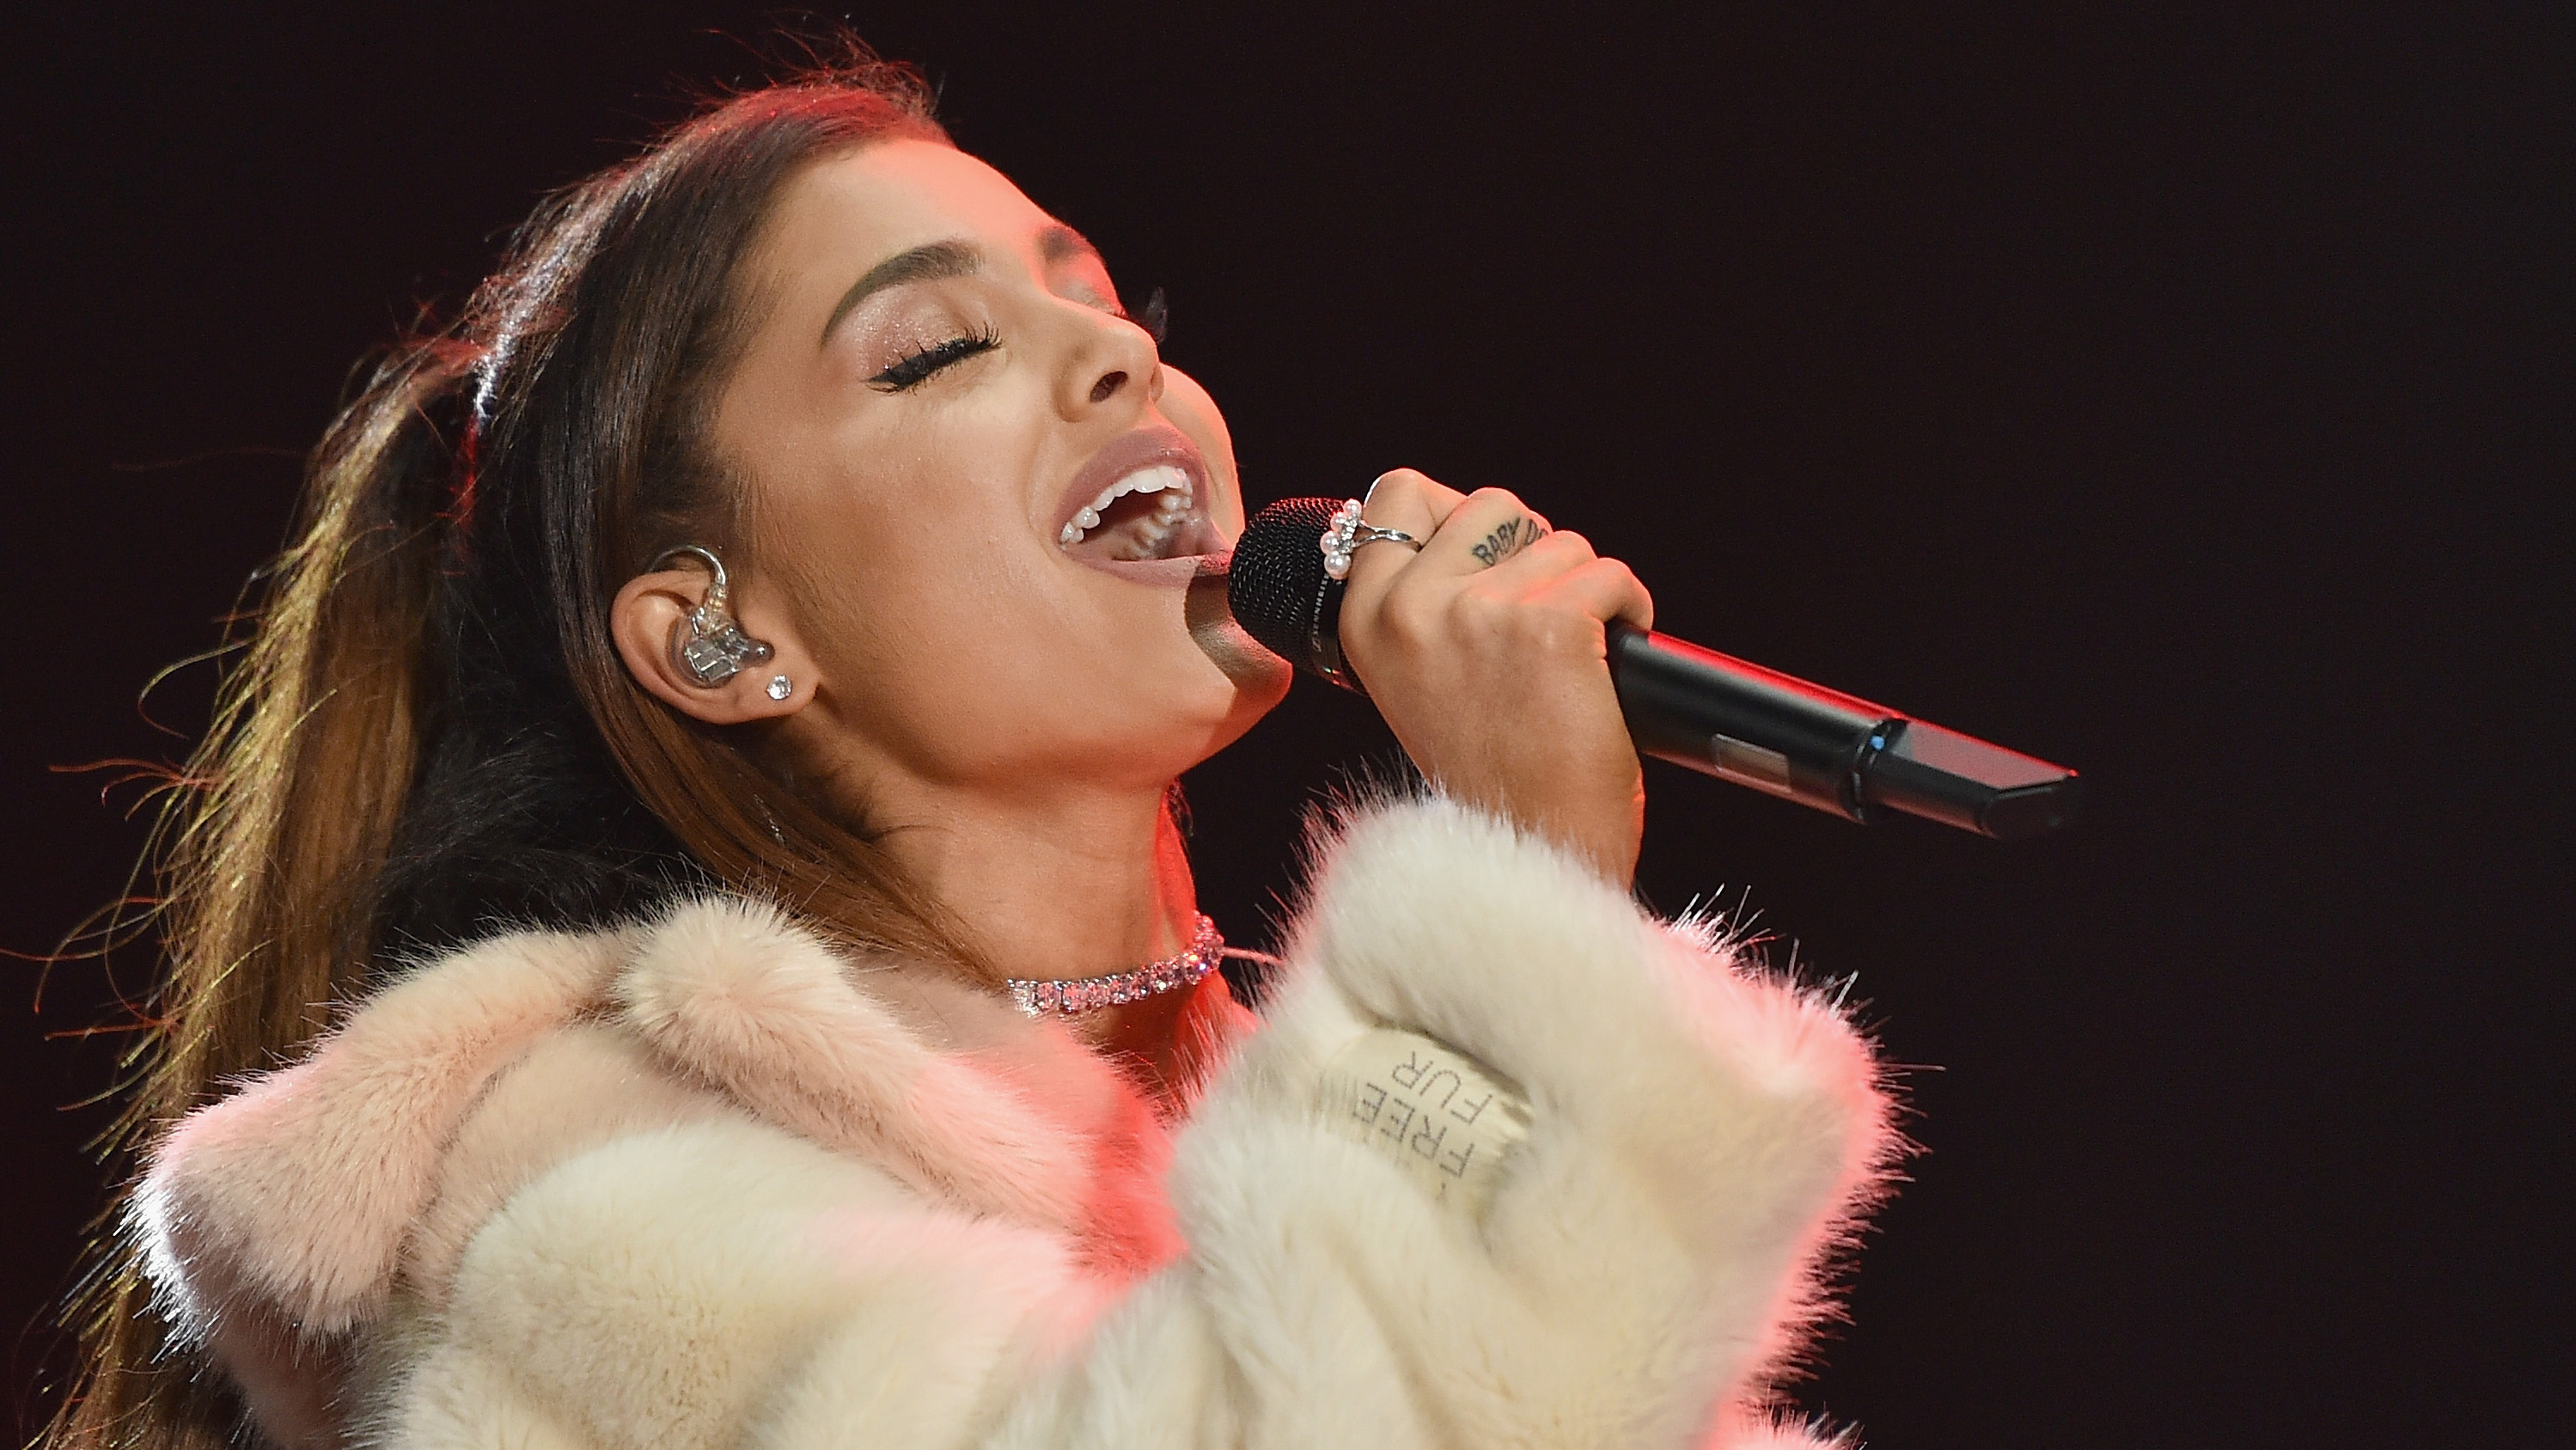 Ariana Grande Naked Xxx - Start talking about Ariana Grande's fight for equality â€” not...